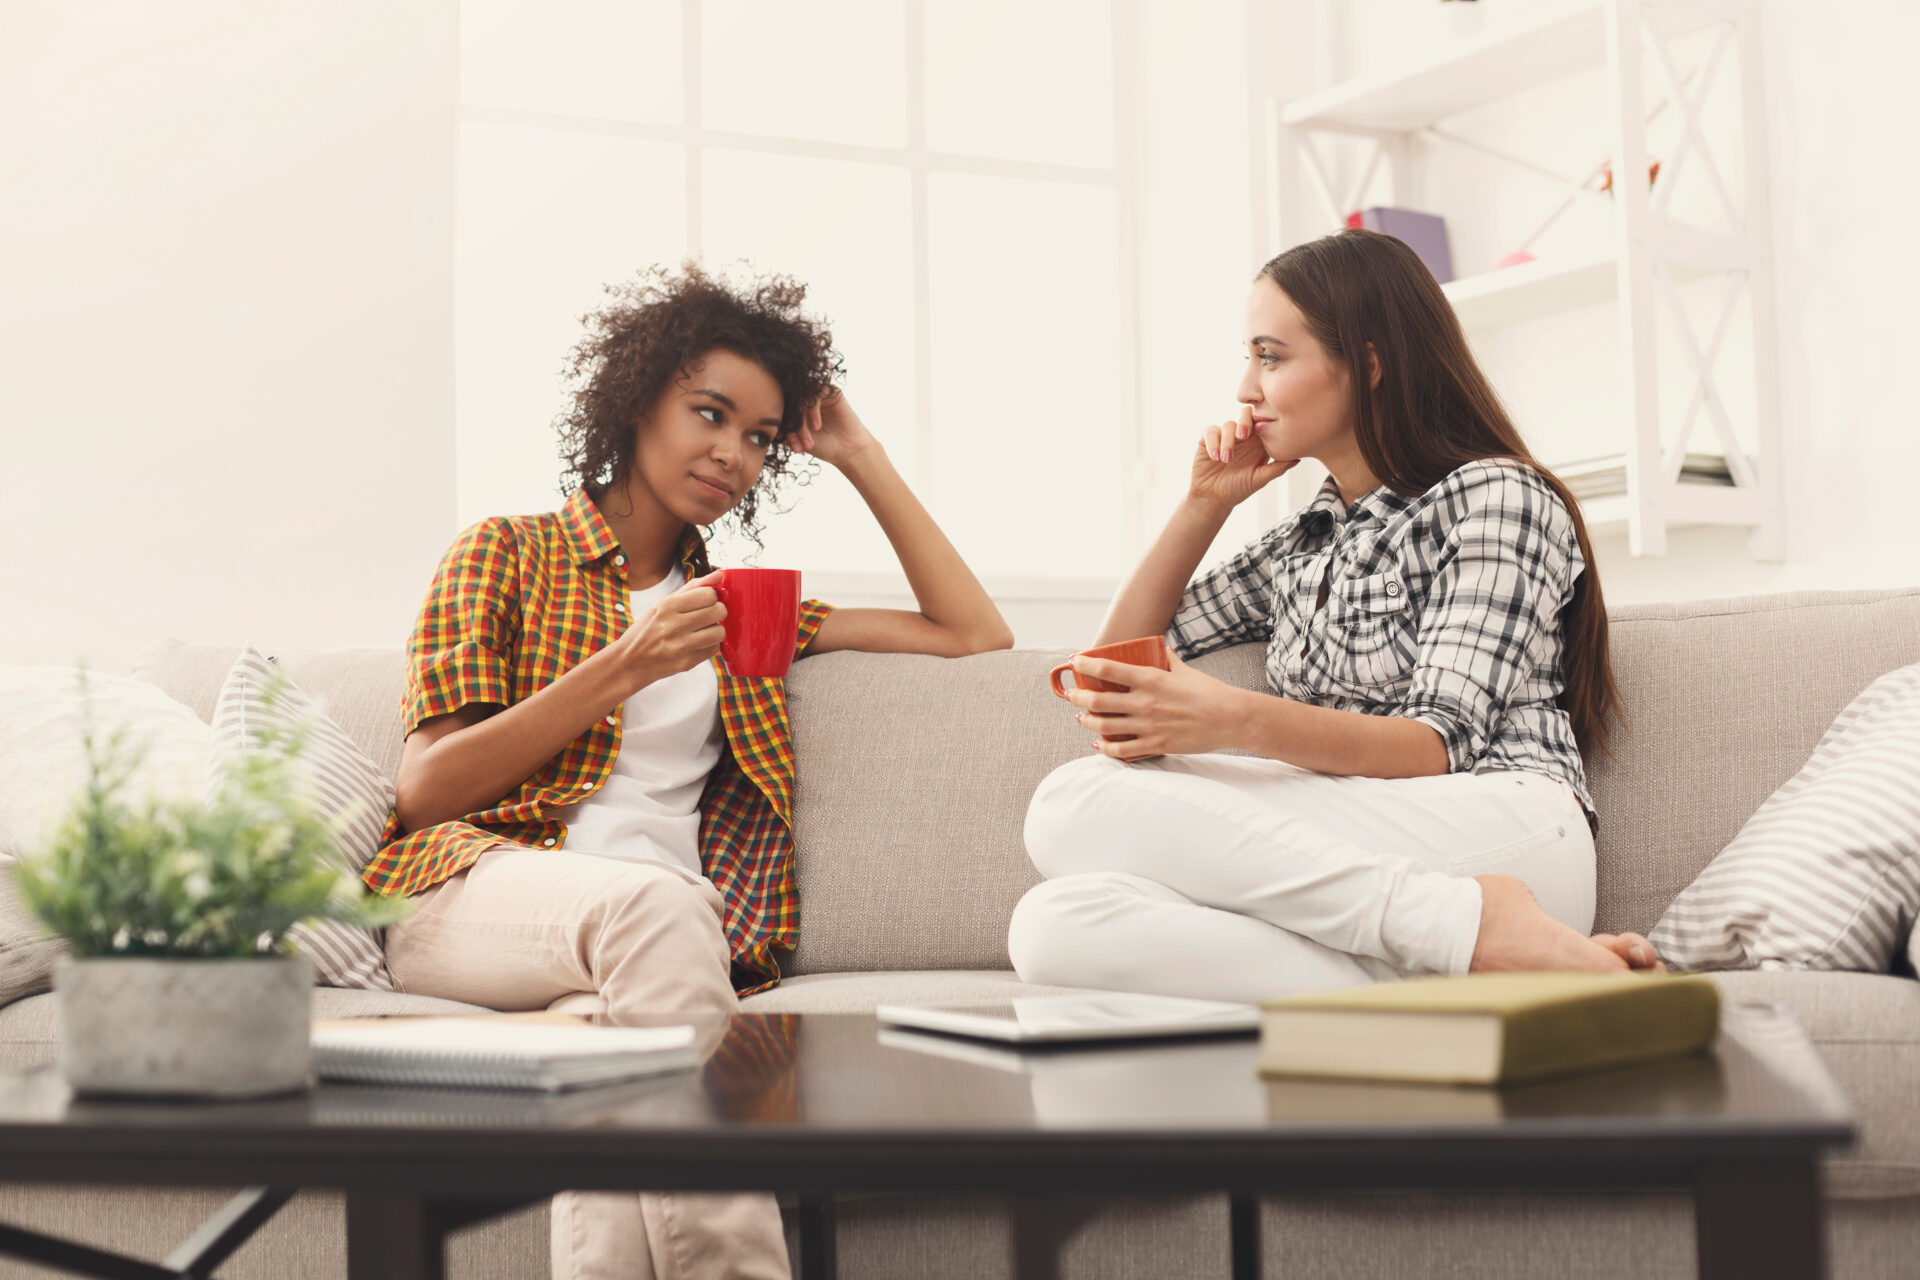 Two women sitting on a couch drinking coffee.